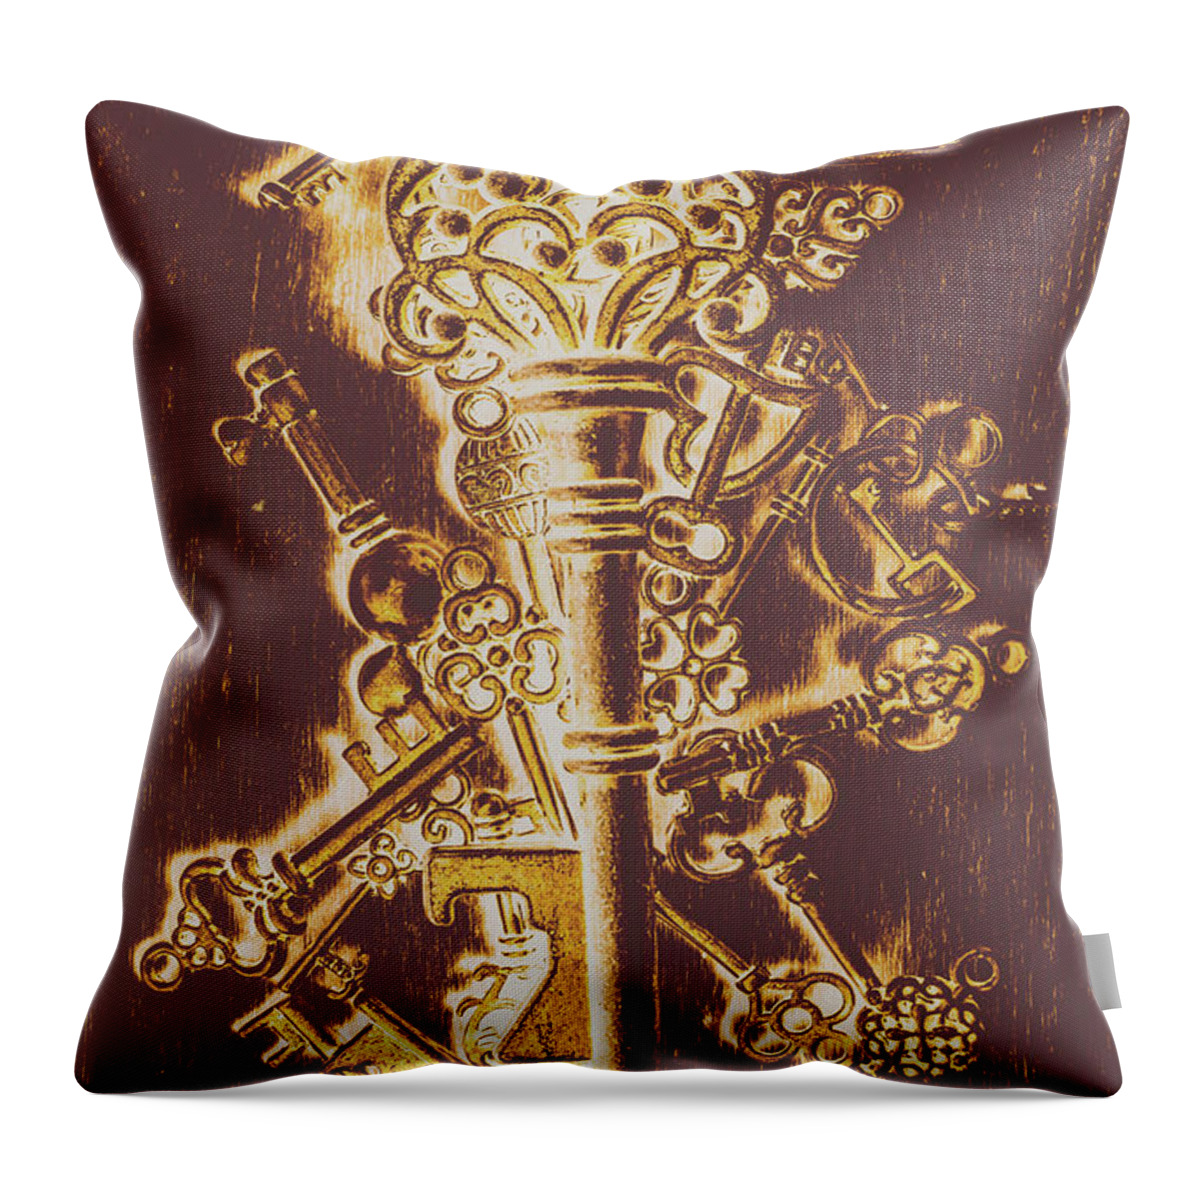 Key Throw Pillow featuring the photograph Master key by Jorgo Photography